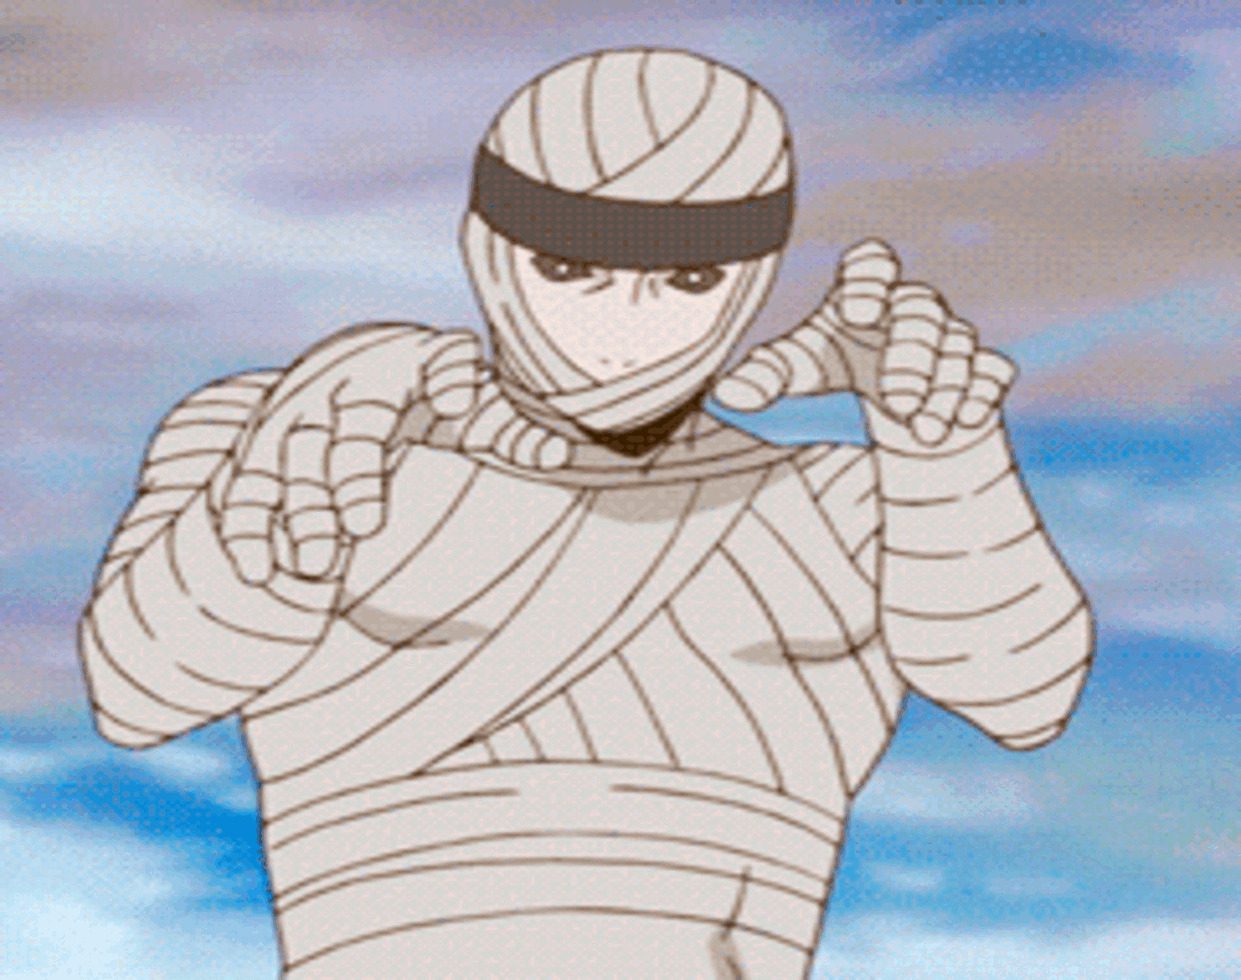 29 strongest Naruto characters ranked